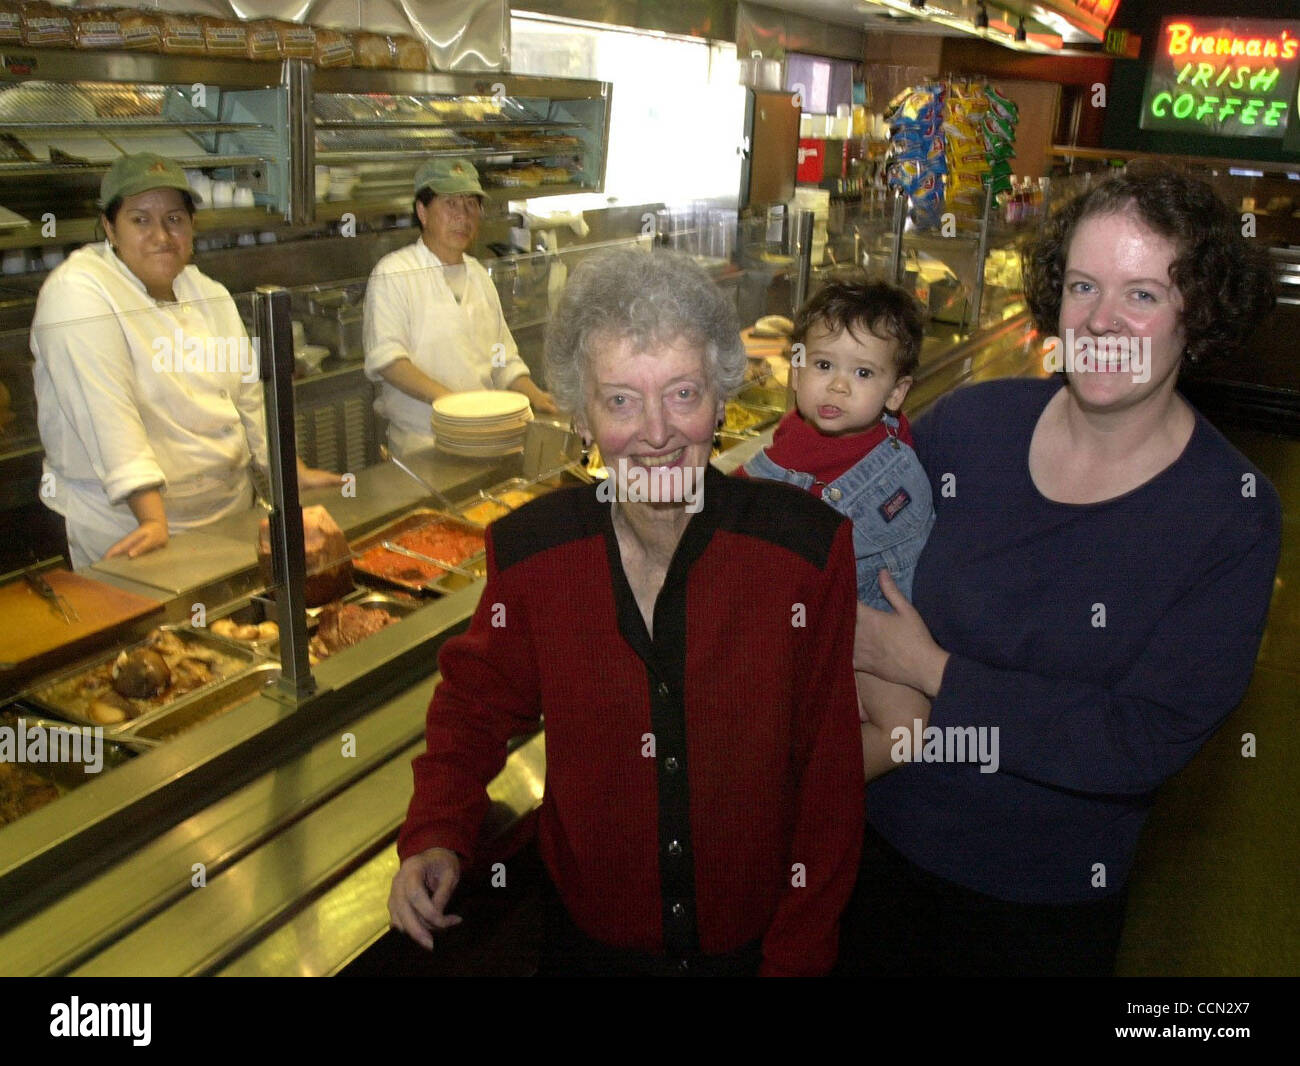 Brennan's restaurant owner Elizabeth Wade, her grandson Sebastian Barboza, 16 months, and her daughter and Sebastian's mom Margaret Wade, stand next to the hof brau style serving counter of the restaurant in Berkeley, Calif., on Tuesday July 27, 2004. Brennan's was established in 1959 and is not goi Stock Photo